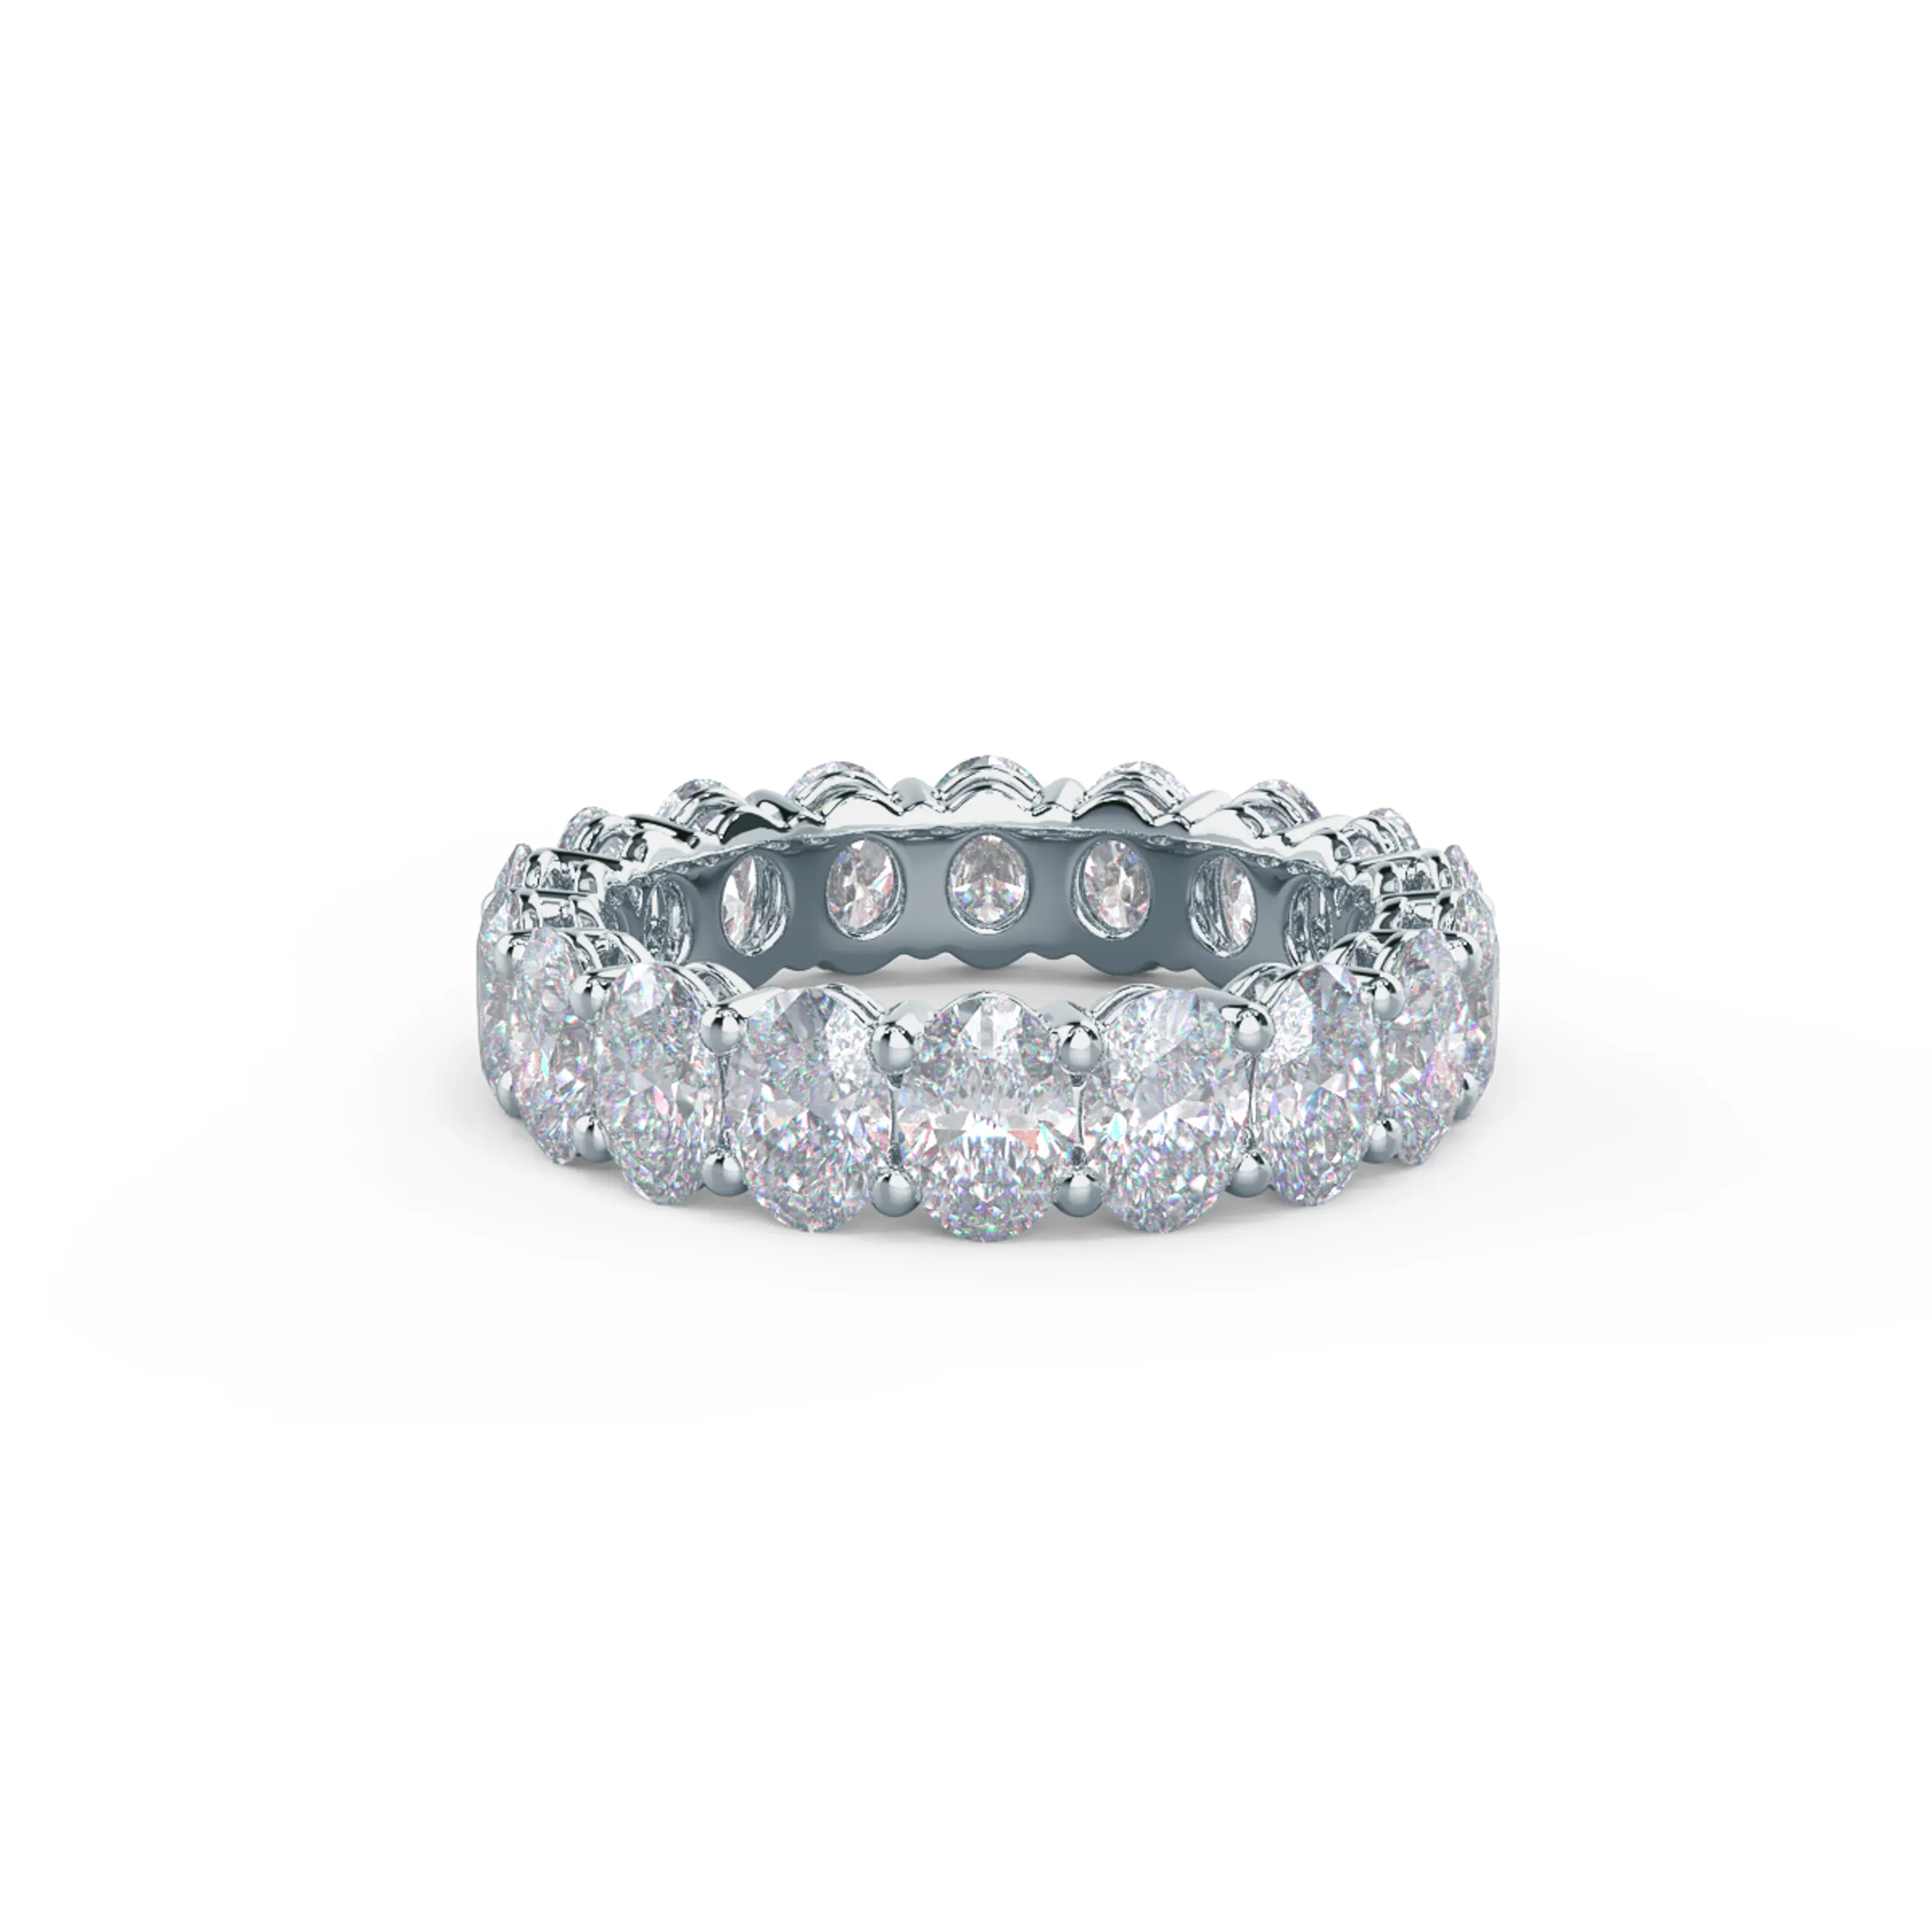 18k White Gold Oval Basket Eternity Band featuring 5.5 ctw Lab Created Diamonds (Main View)